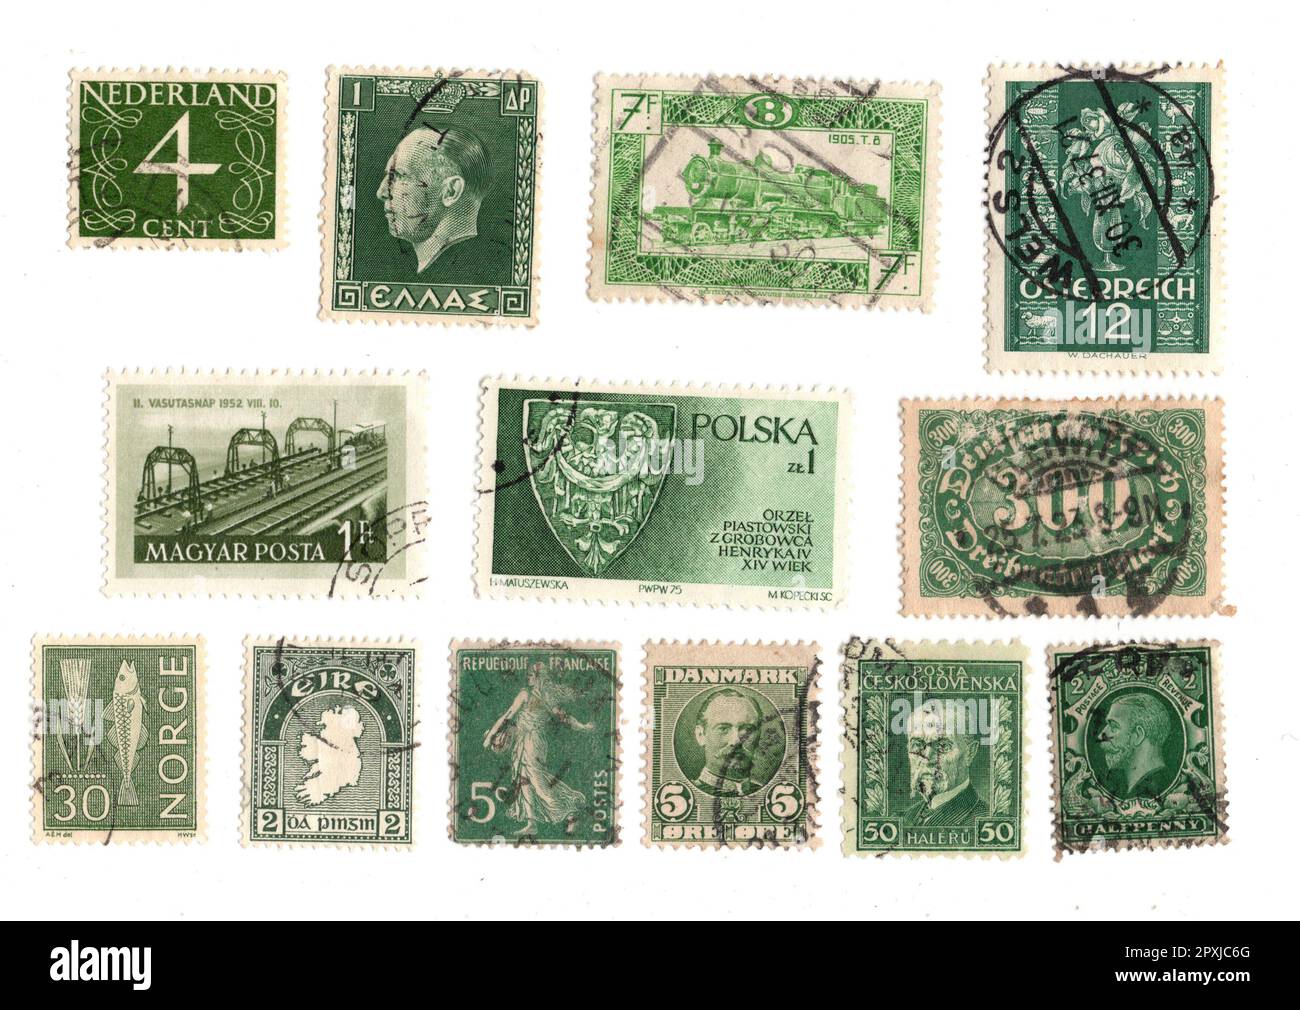 Green vintage postage stamps from Europe isolated on a white background. Stock Photo